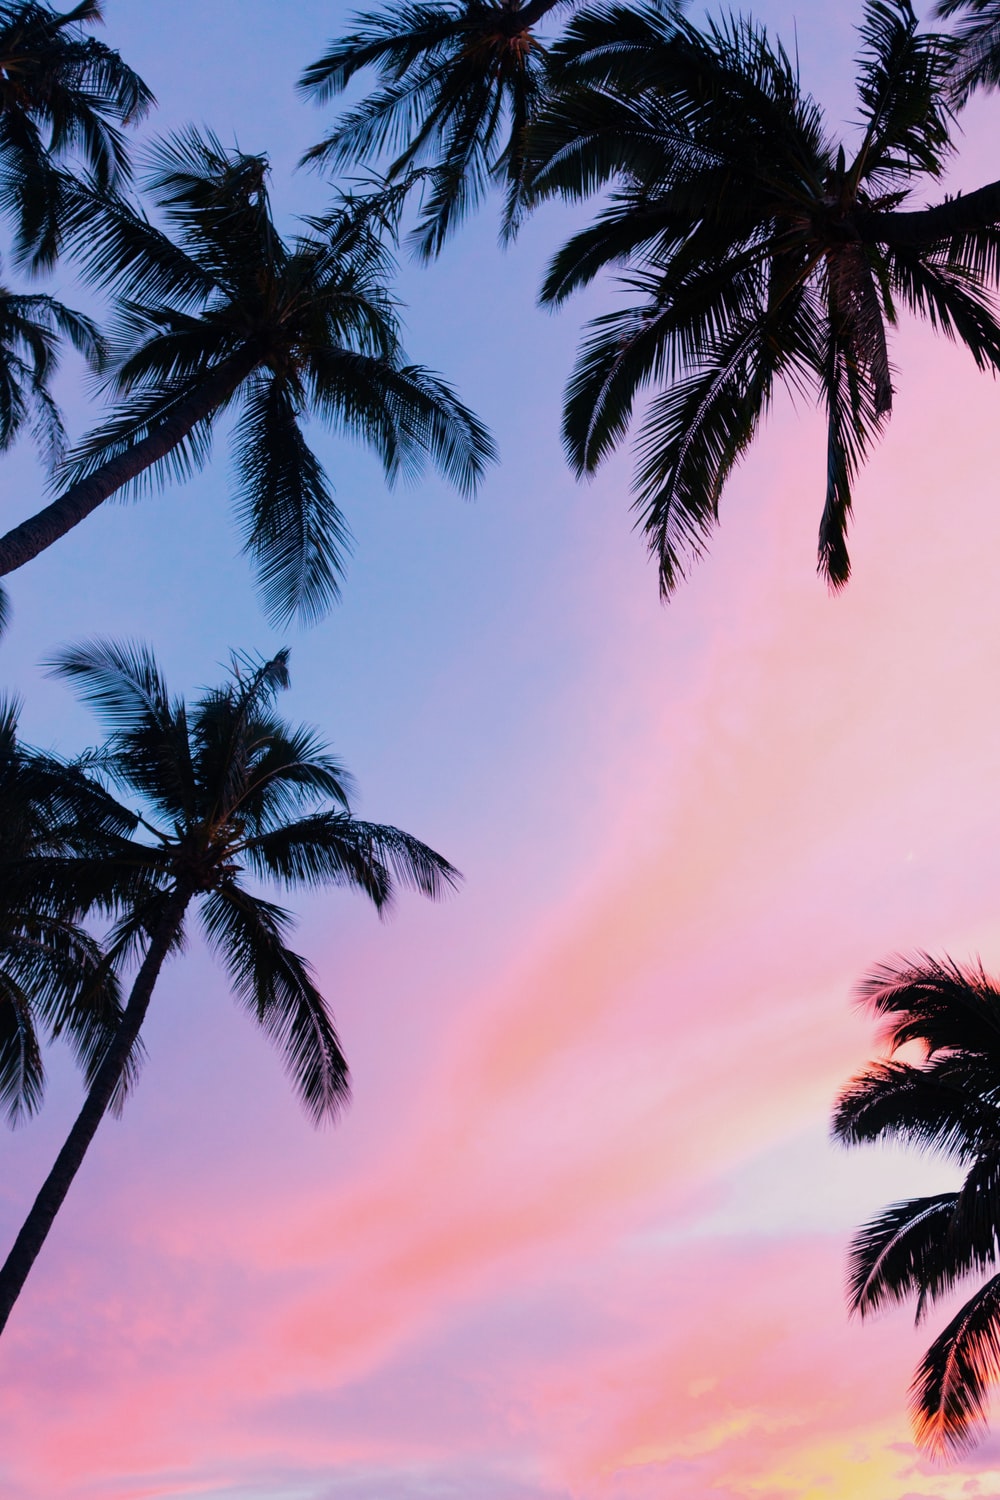 free-download-900-palm-tree-images-download-hd-pictures-photos-on-1000x1500-for-your-desktop